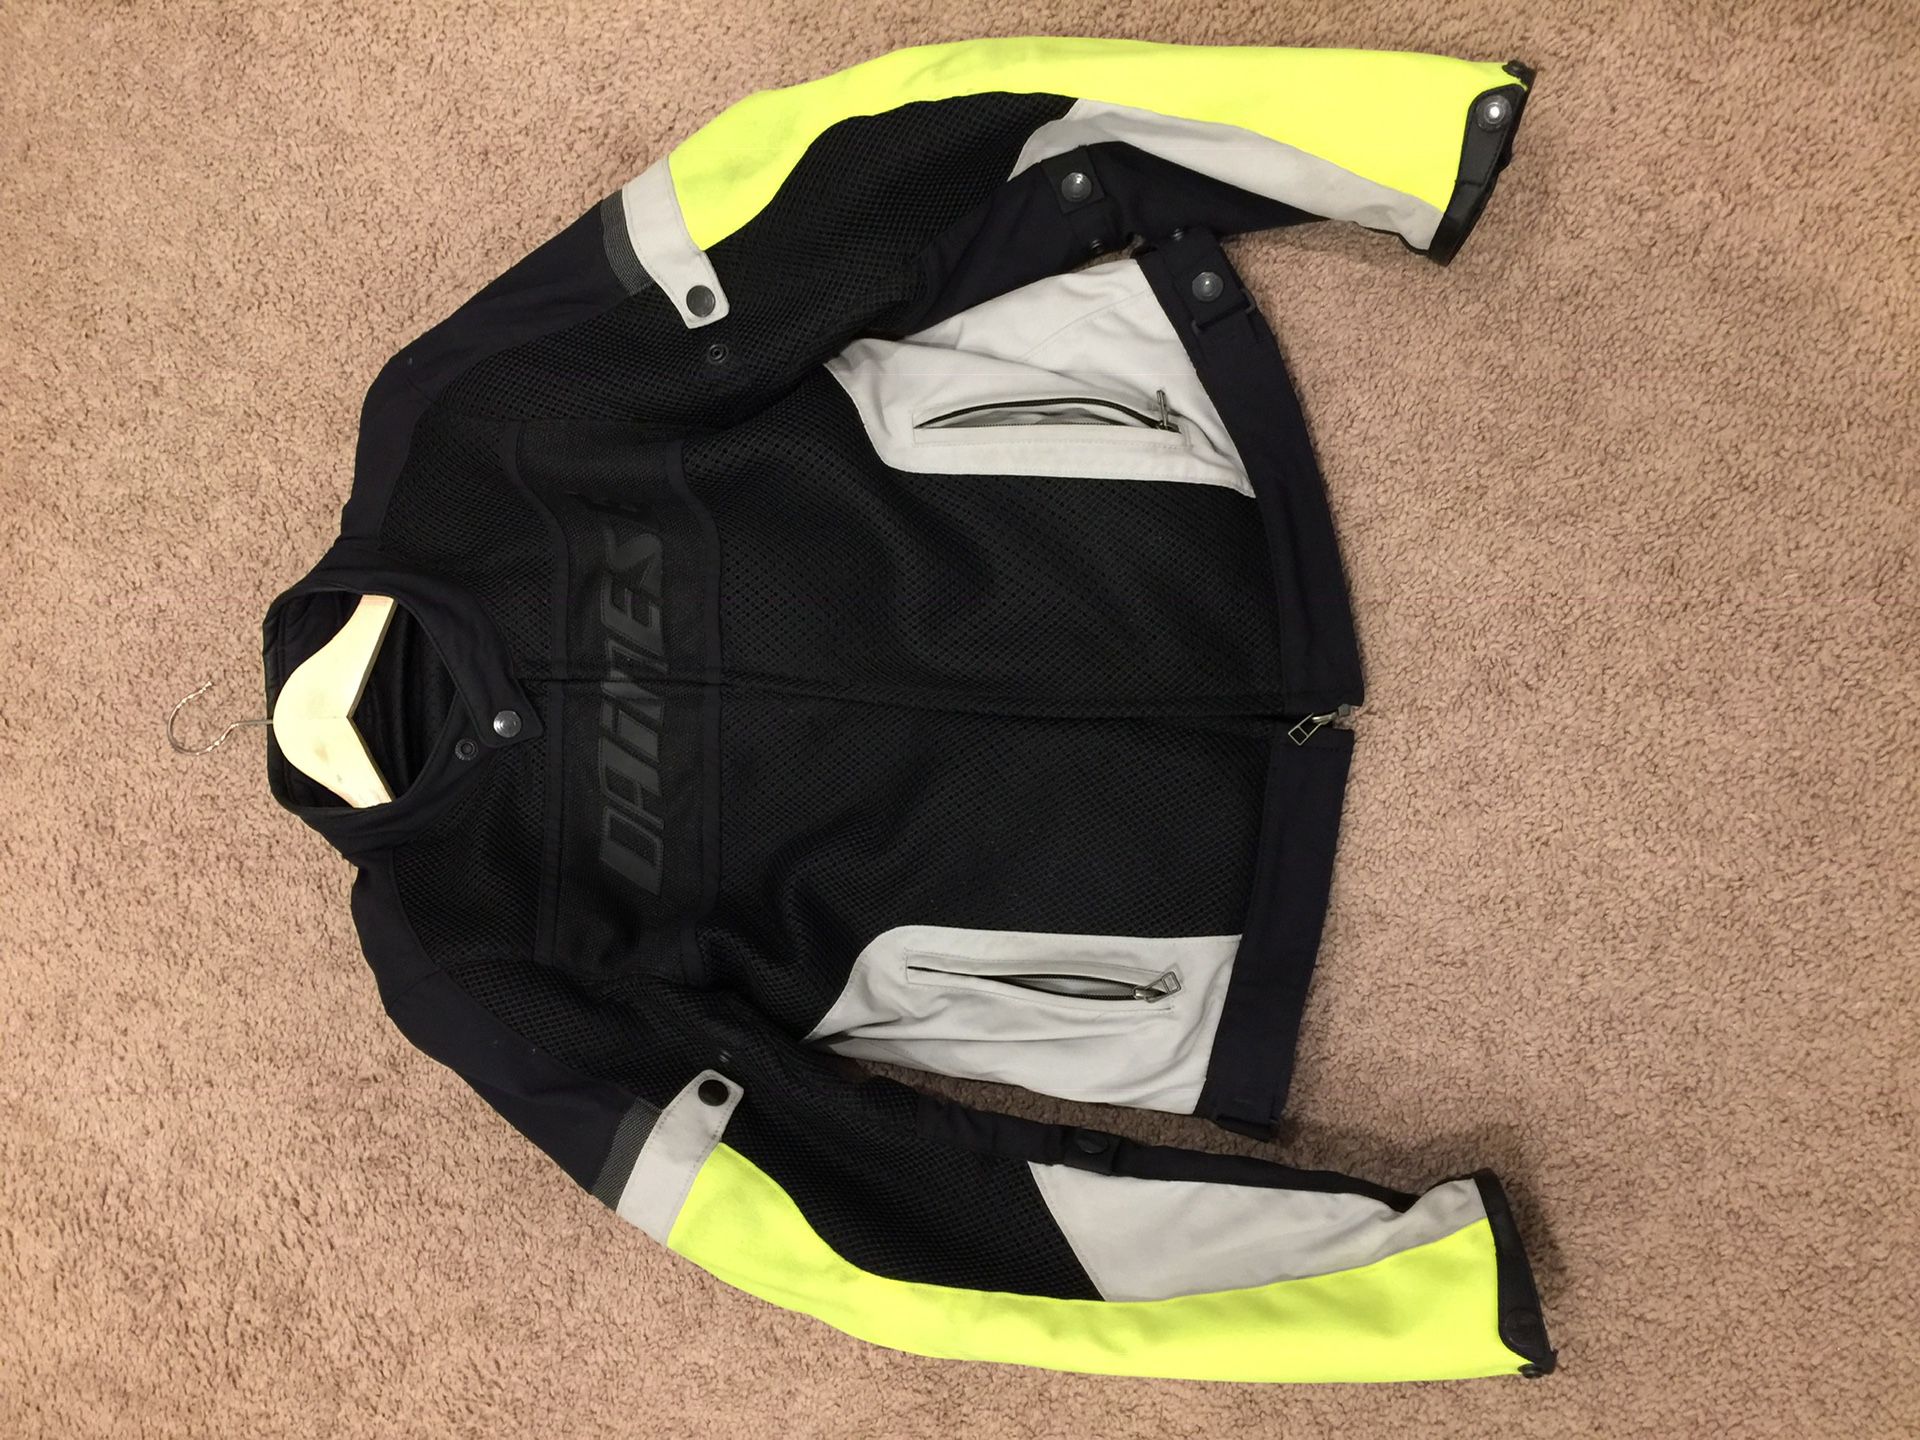 Dainese Motorcycle Street Mesh Riding Gear